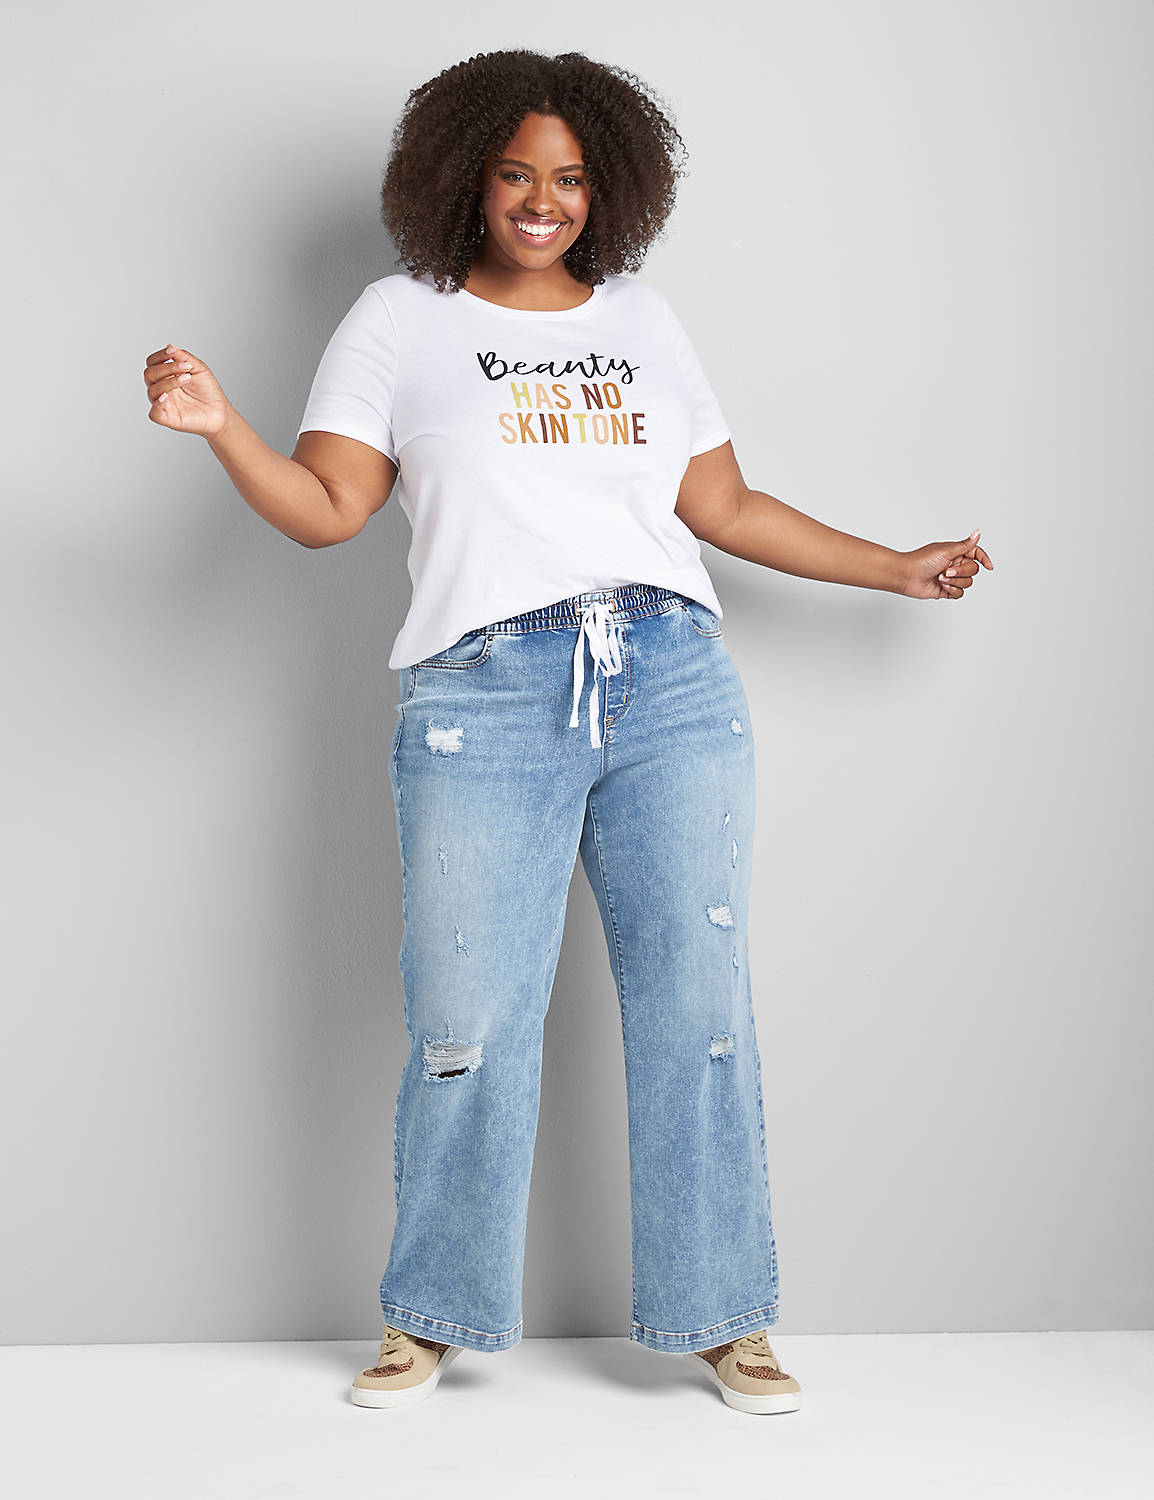 Beauty Has No Skin Tone Graphic Tee Product Image 1